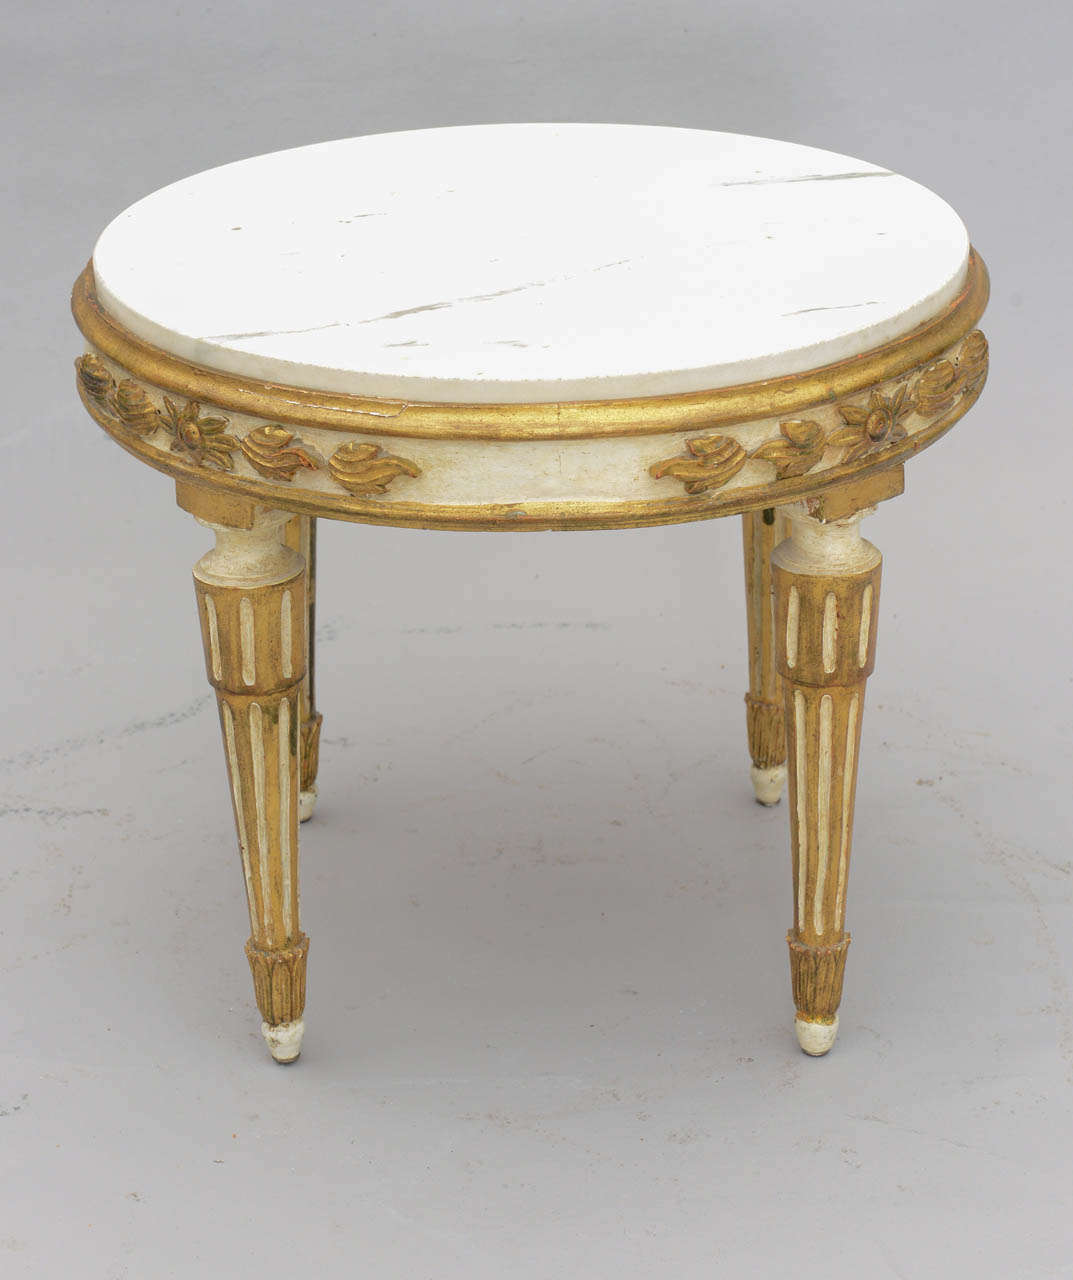 louis xvi giltwood accent table with carrara marble top large pink lounge room side tables metal garden west elm pendant lamp turquoise furniture drum chair modern bedside lamps